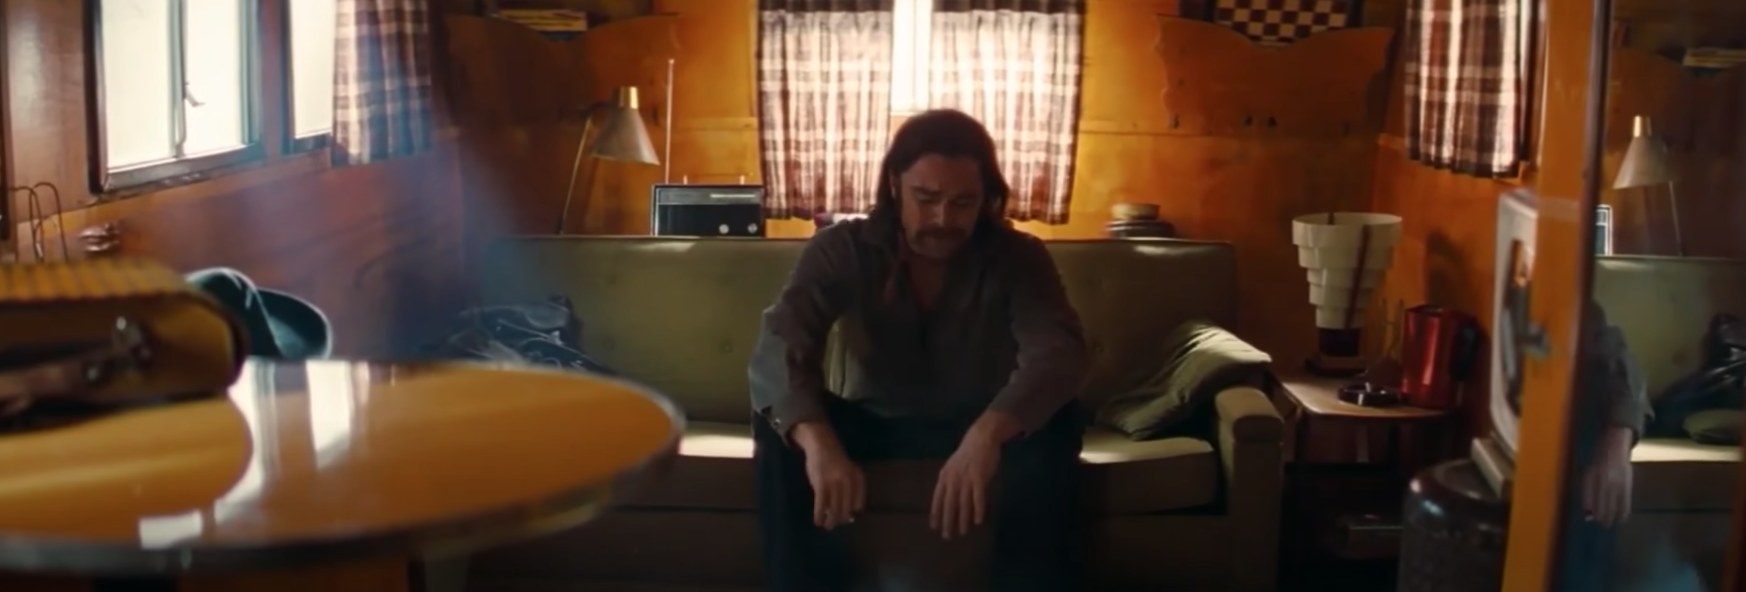 Rick Dalton meltdown in trailer in Once Upon a Time in Hollywood